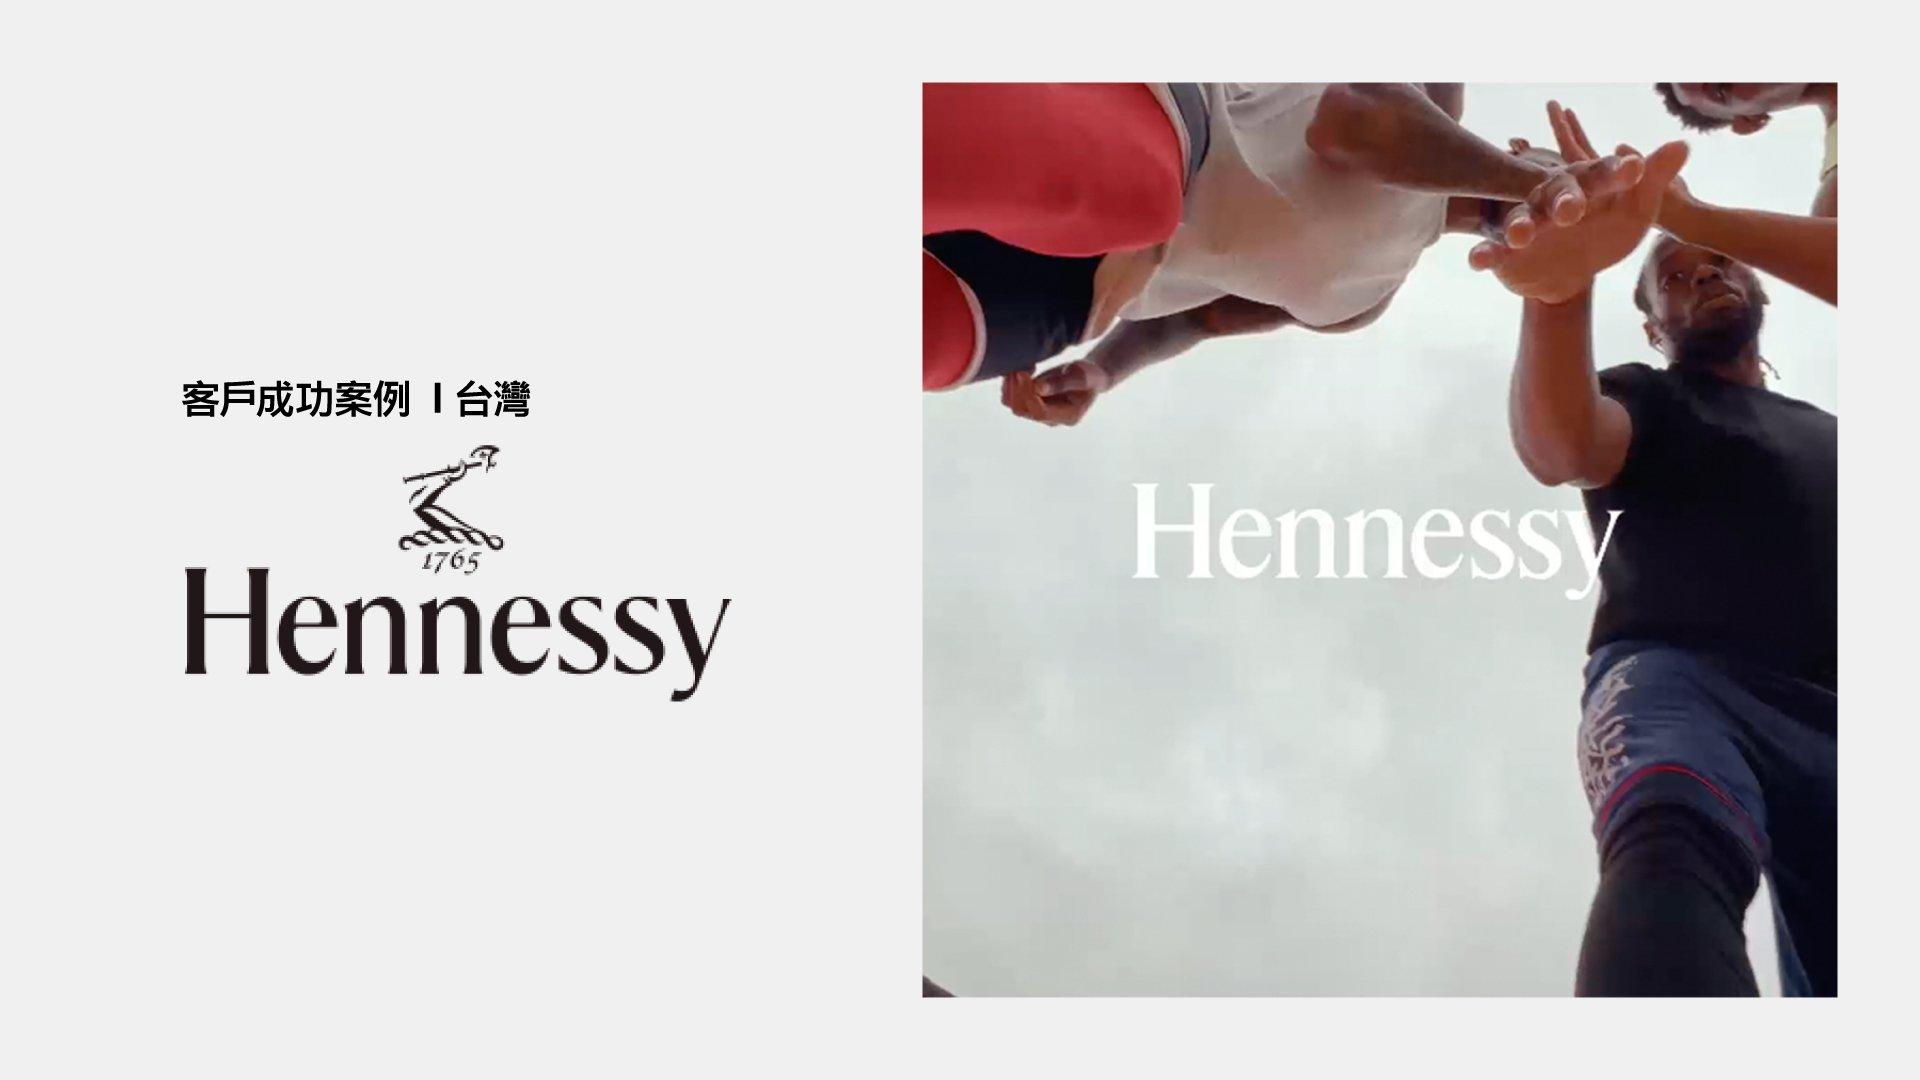 Hennessy case study results